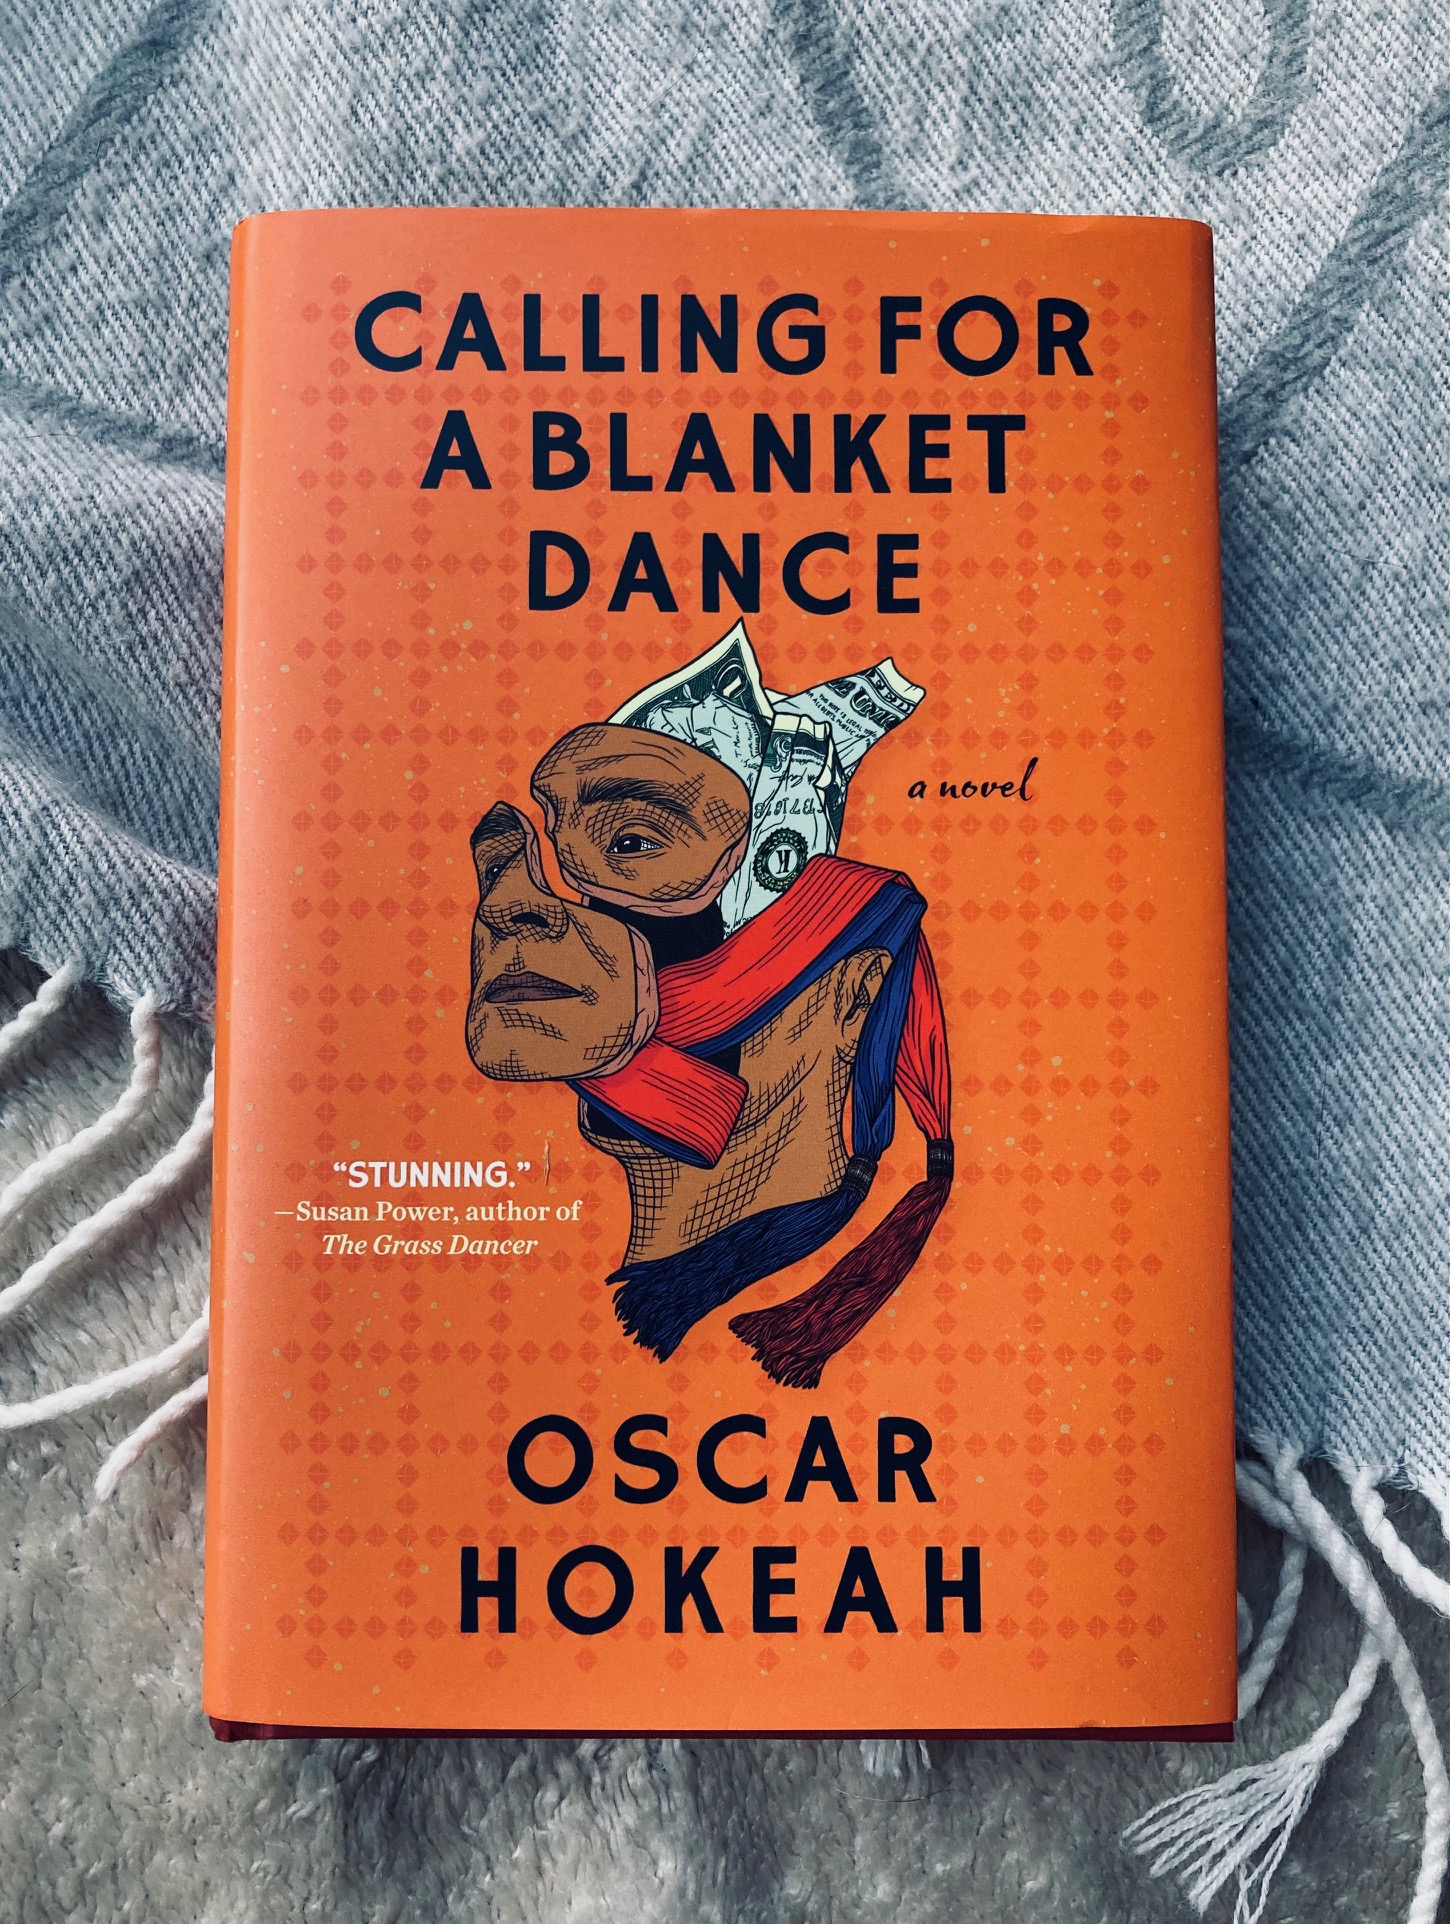 Calling for a Blanket Dance by Oscar Hokeah book